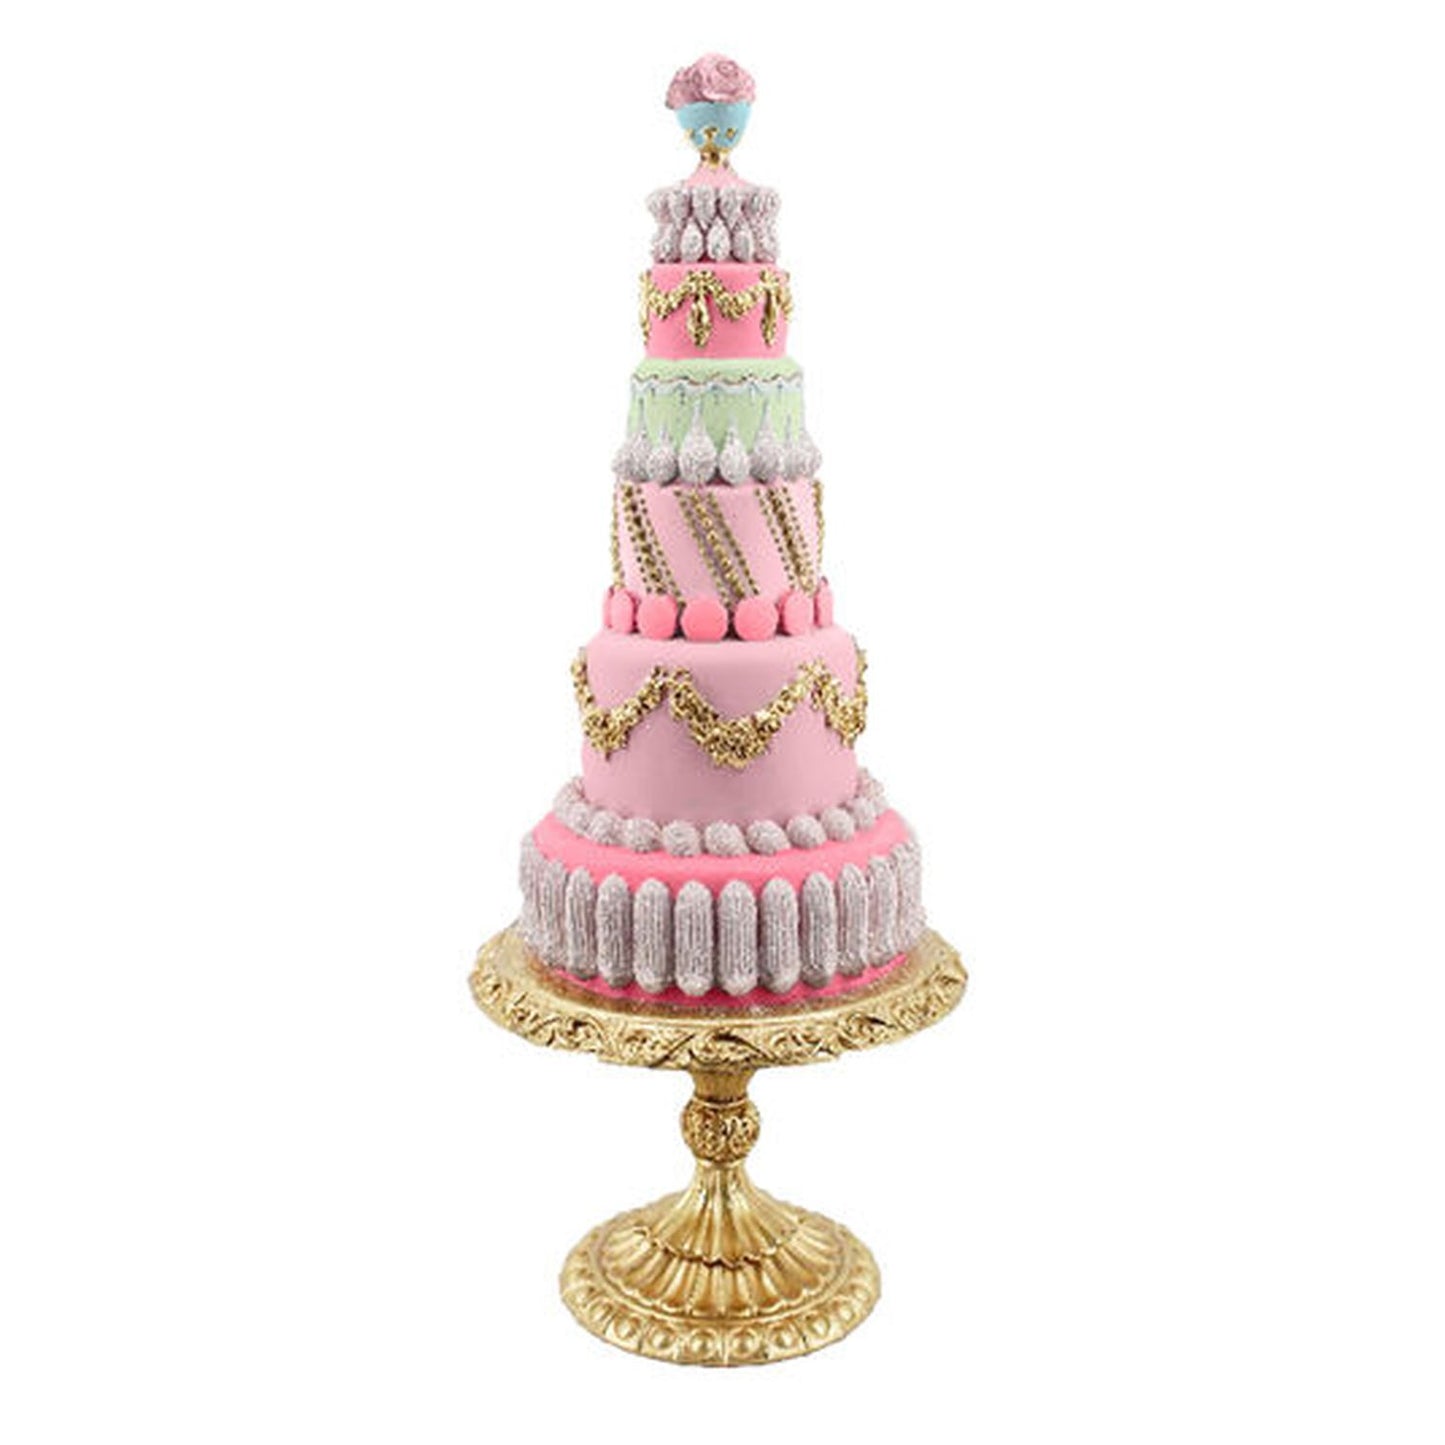 December Diamonds Spring Confections 23" Spring Pink Tiered Cake Figurine